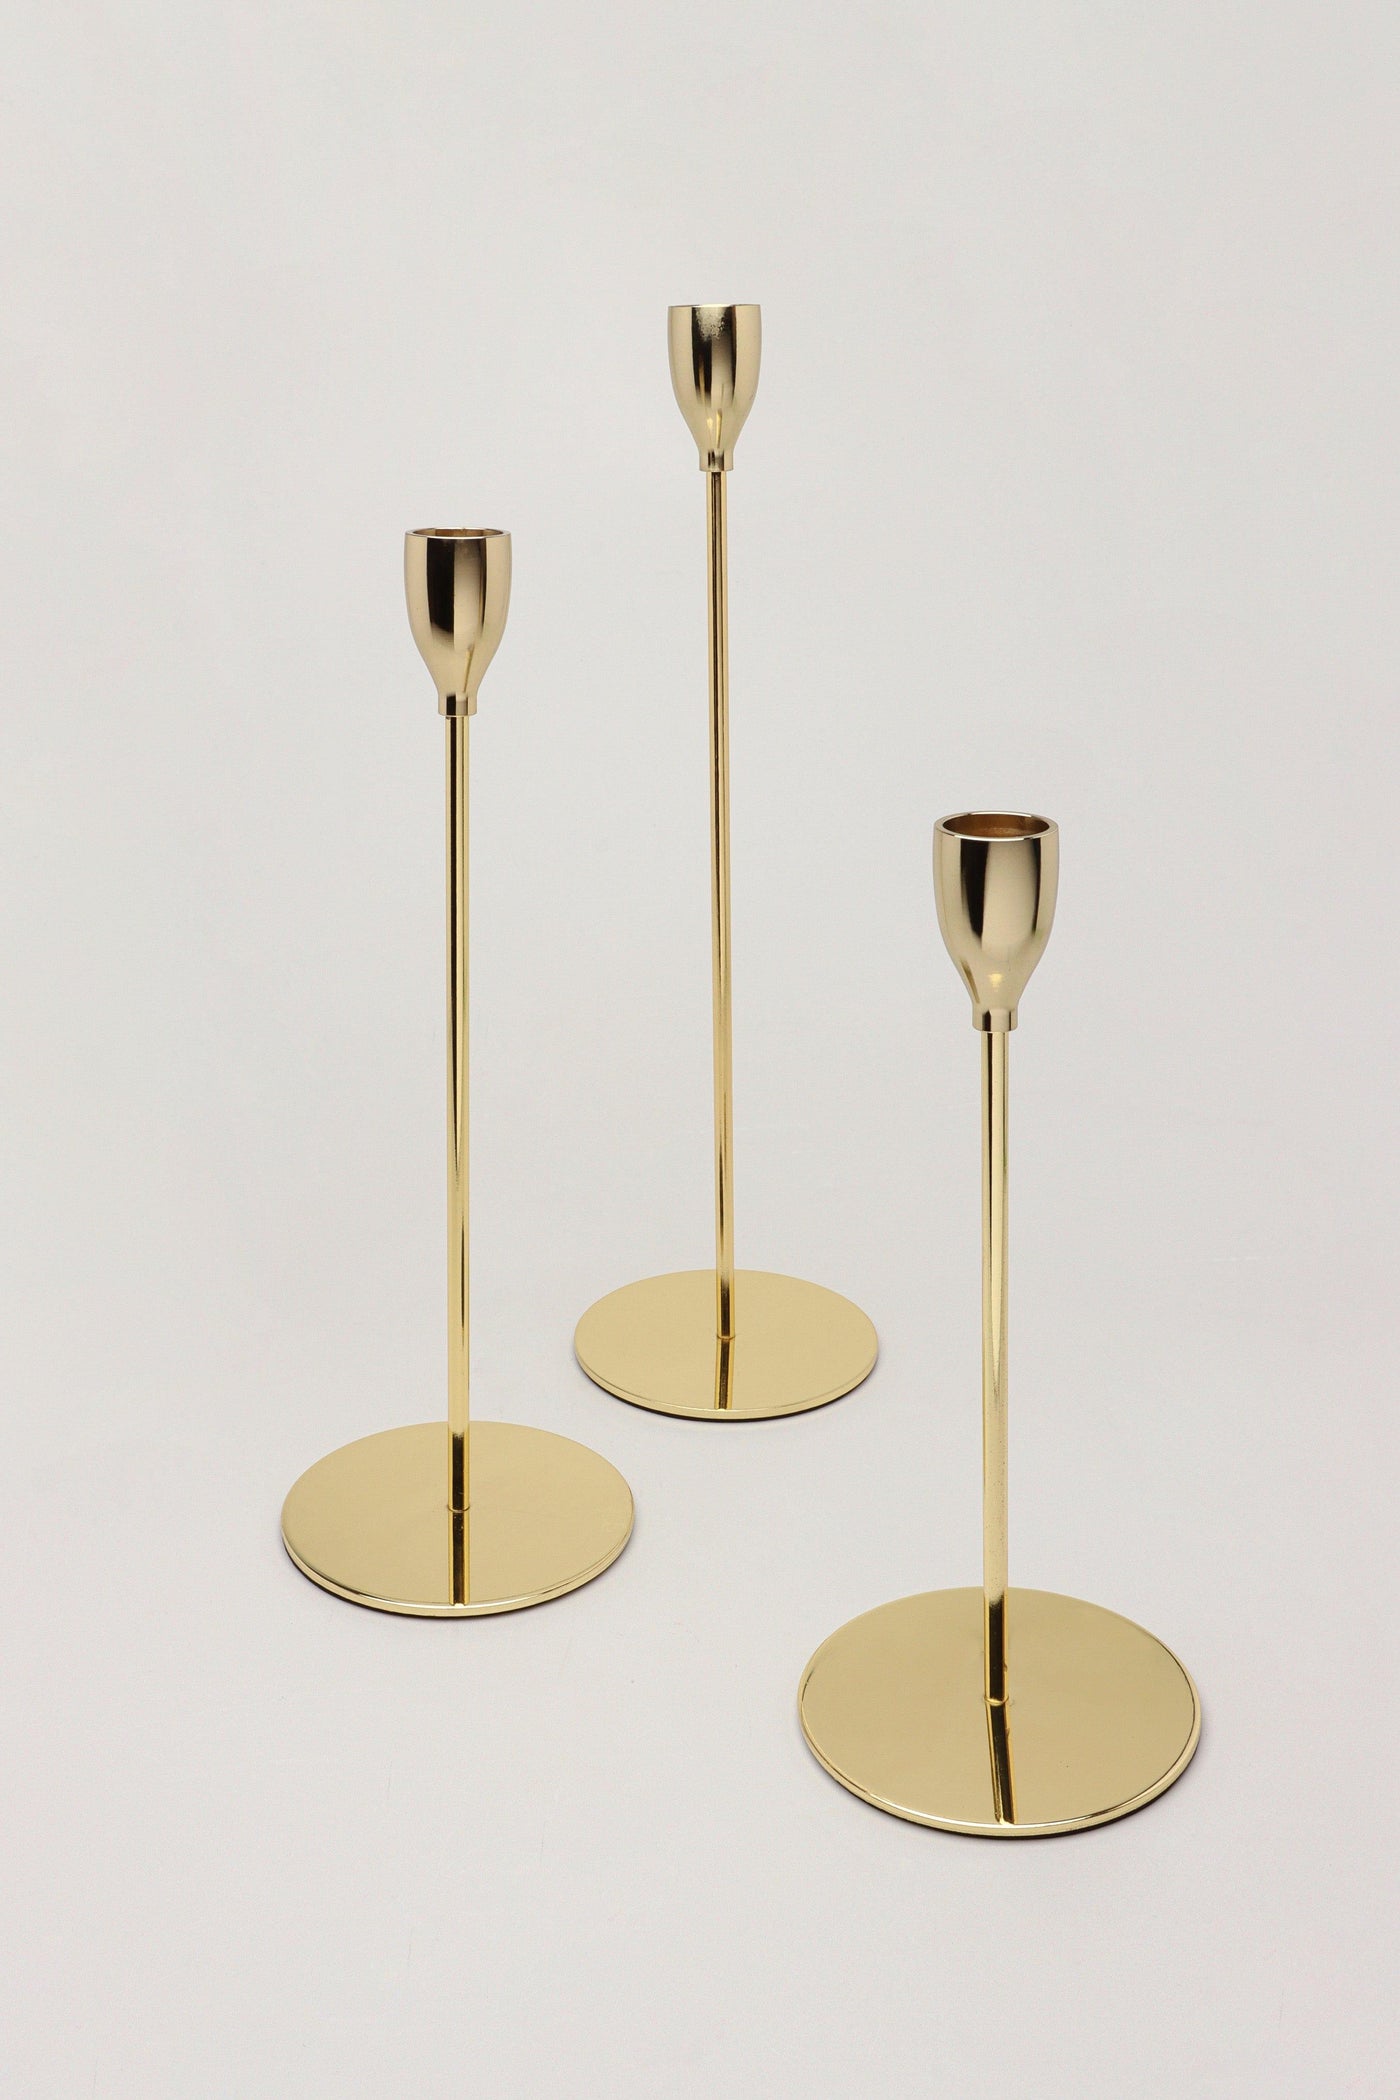 Gdecorstore Candles & Candle Holders Gold Set Of Three Aldwin Gold Brass Metal Classic Dinner Candlesticks Taper Church Candle Holders